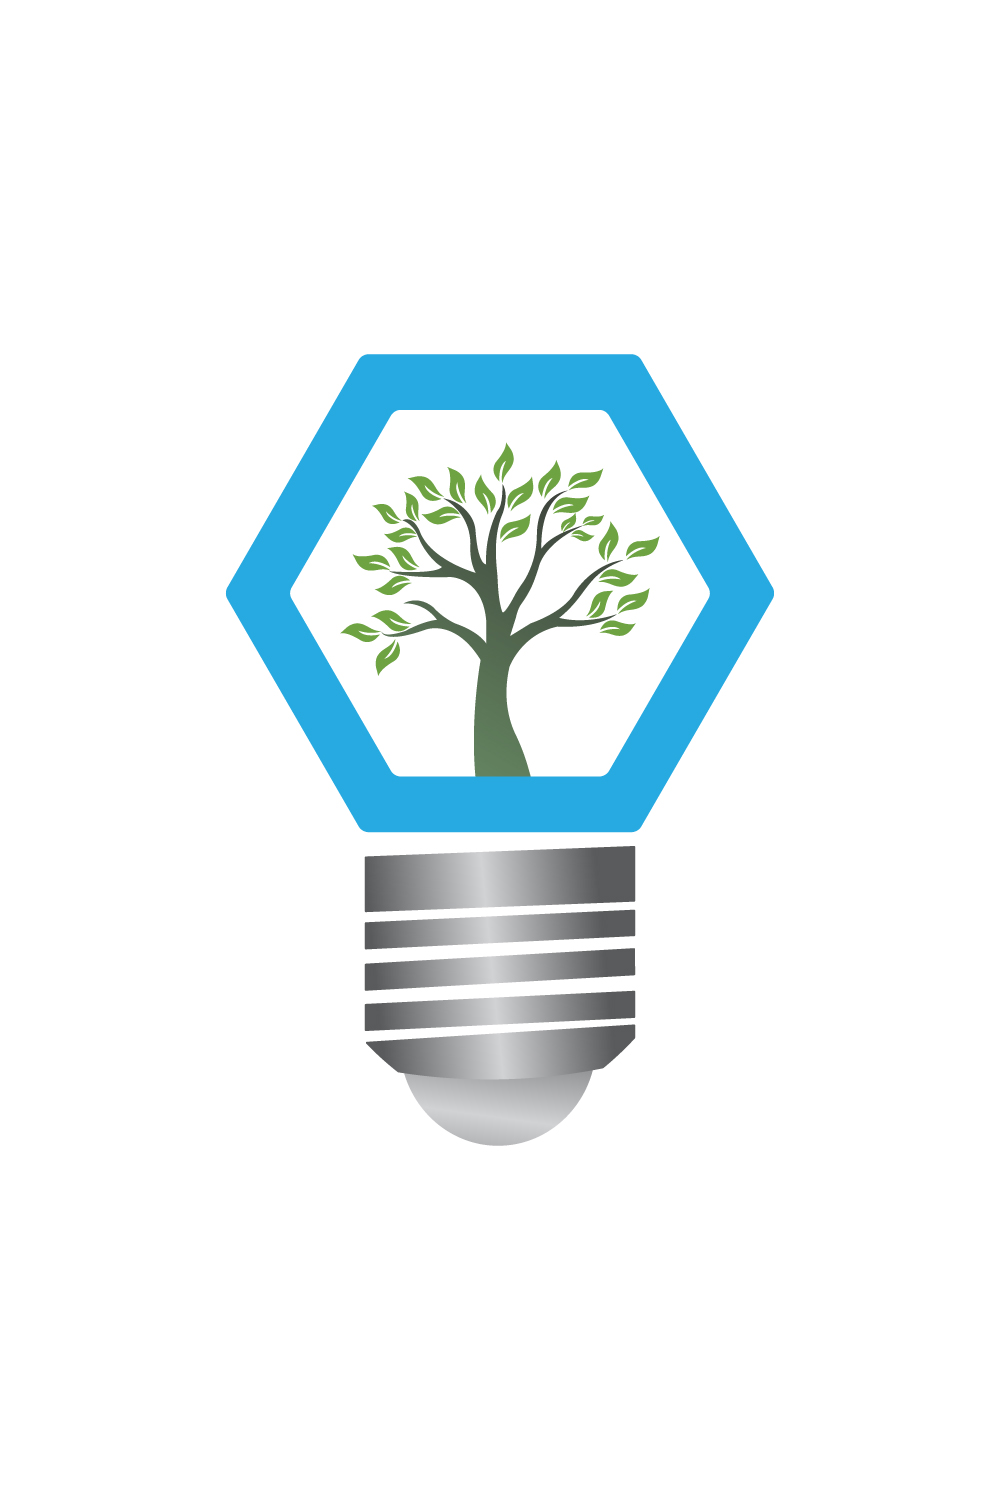 Human Health ang care vector logo design Green Energy icon with light bulb and light logo design pinterest preview image.